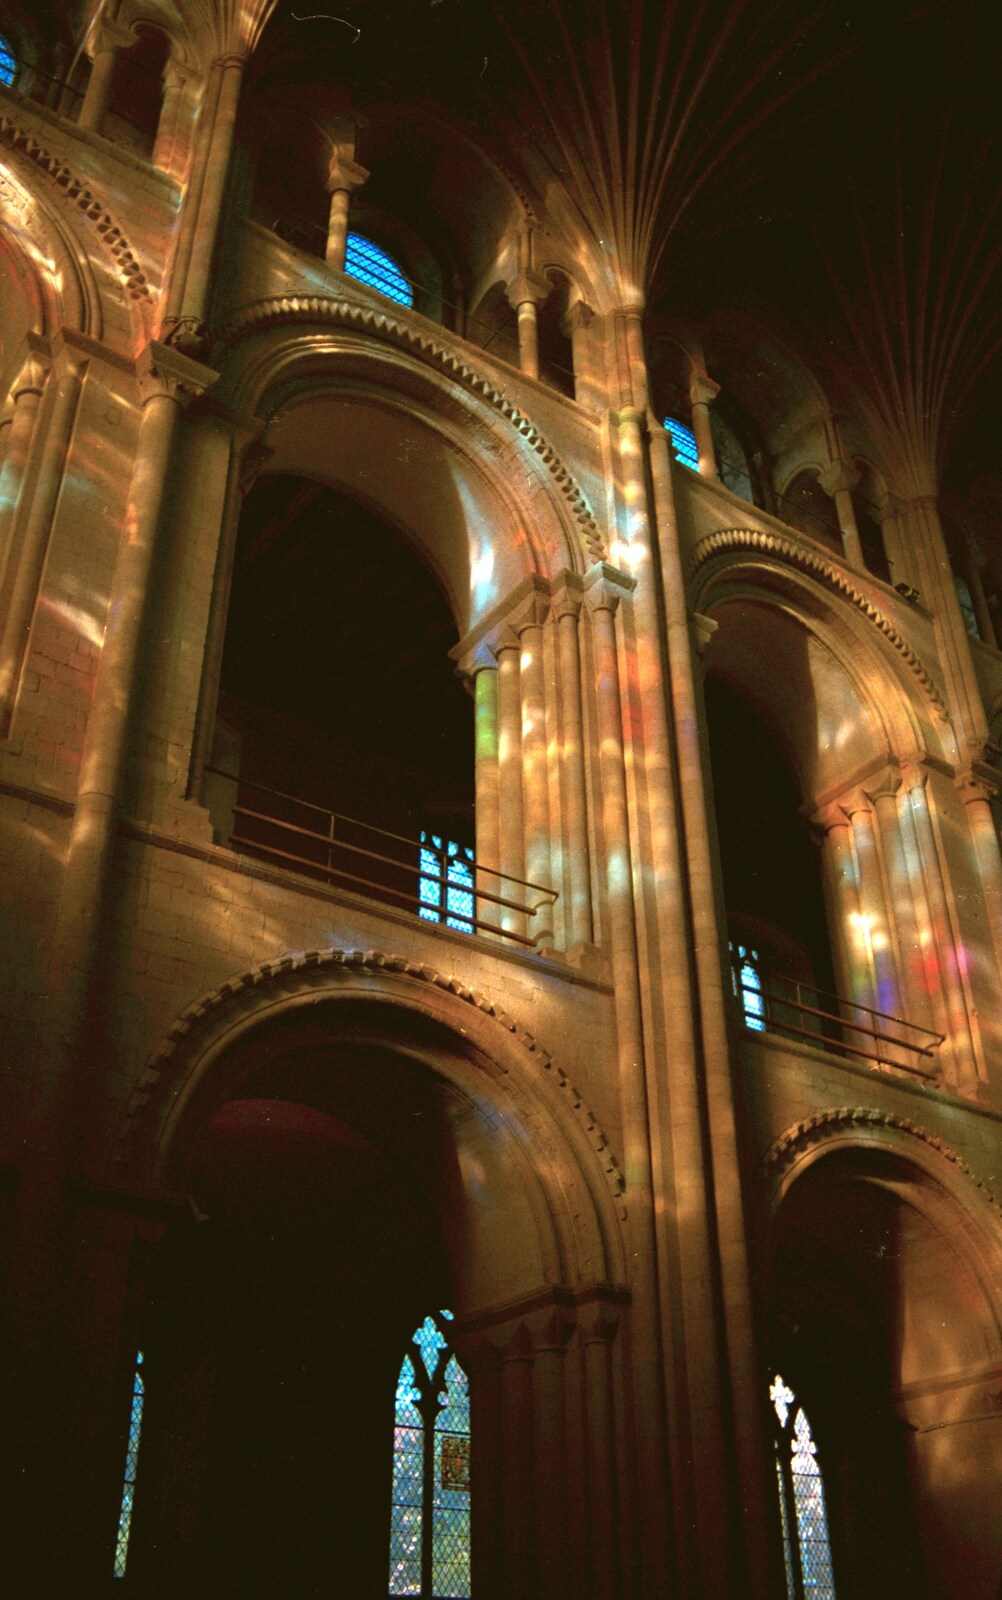 From Waterloo Station to Great Yarmouth, London and Norfolk - 20th September 1987: Coloured light from the stained-glass window plays on the columns of the cathedral